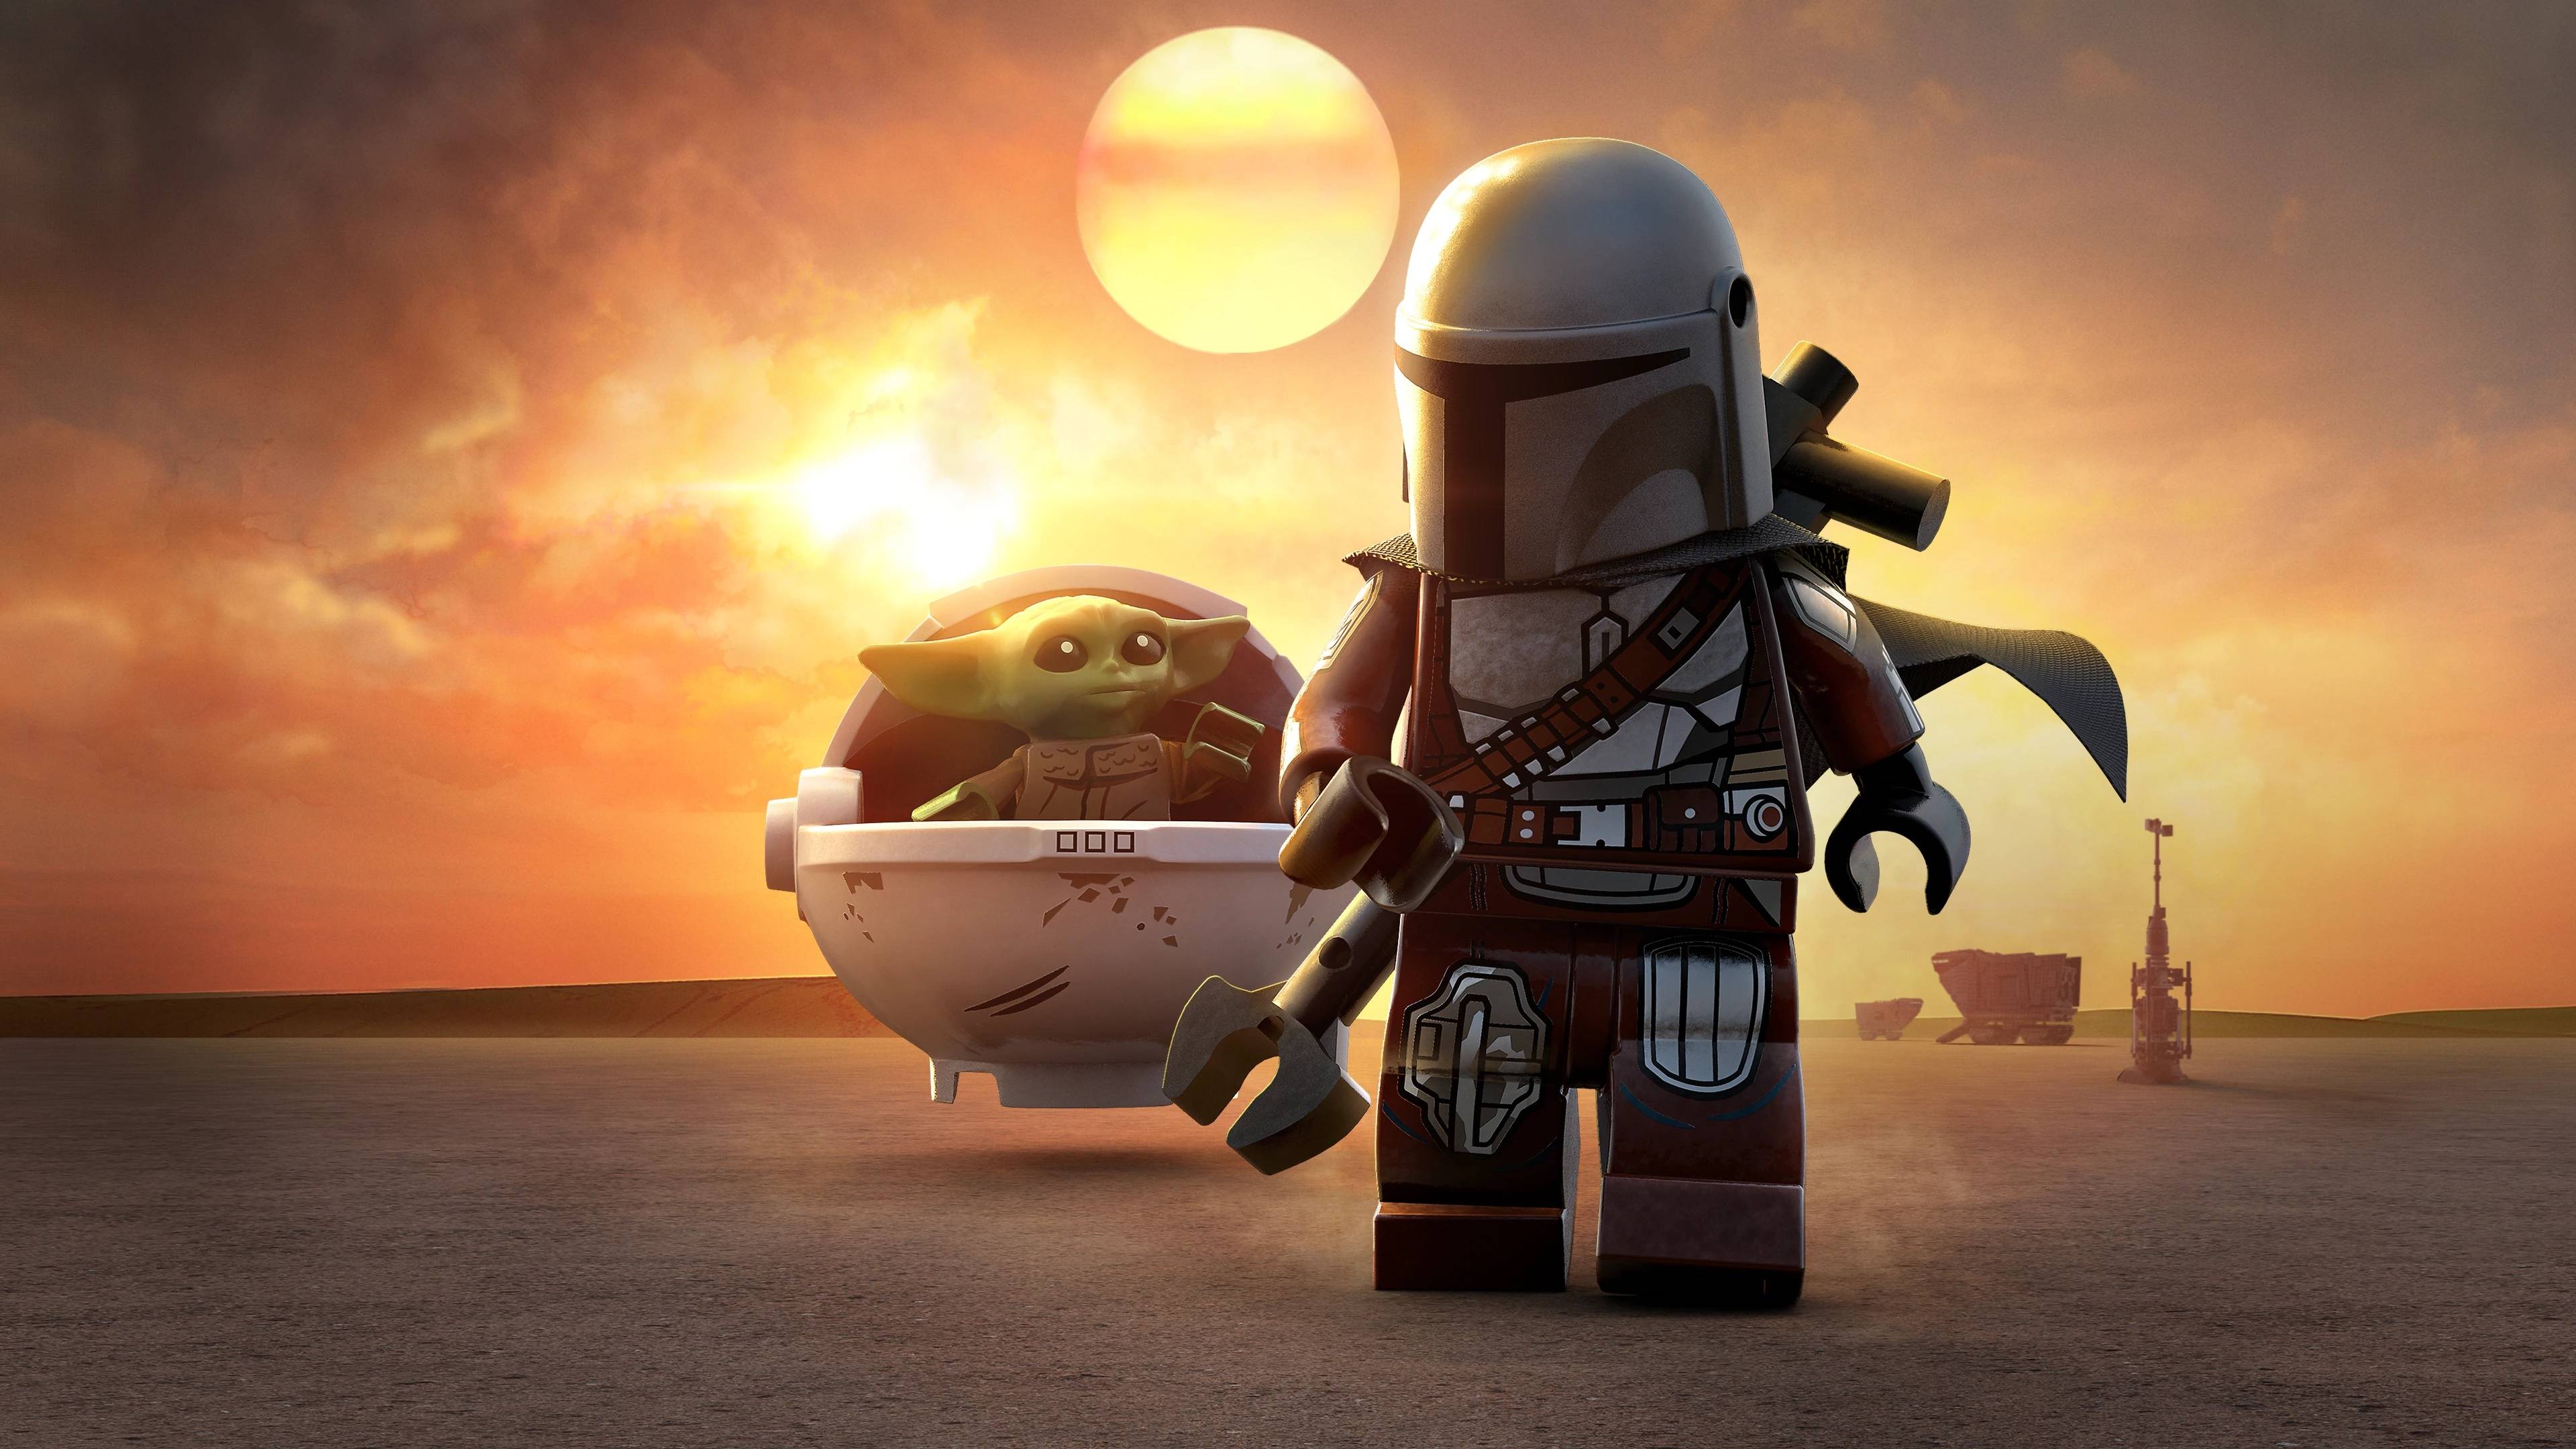 Star Wars HD Wallpapers and 4K Backgrounds - Wallpapers Den